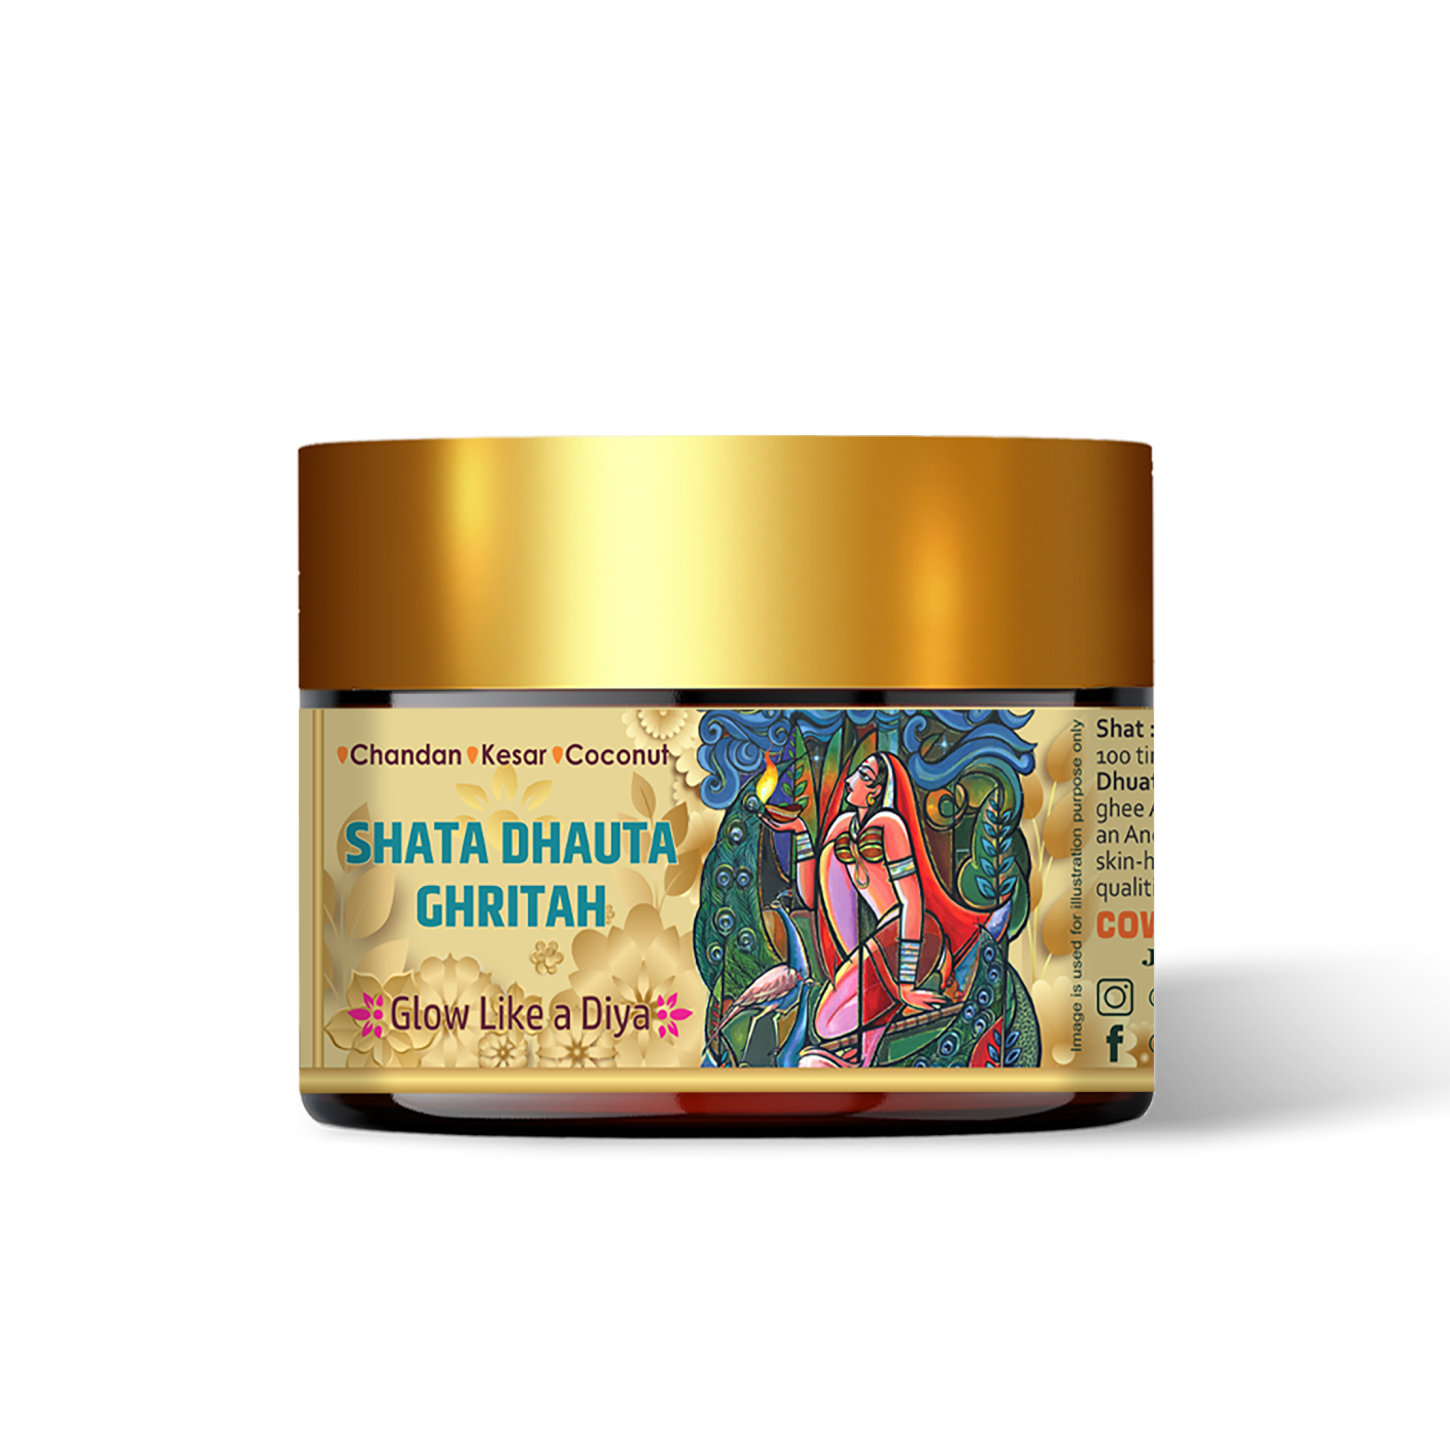 Combo Shata Dhauta Ghritah 100 Times Washed Ghee Free Virgin Coconut Oil (One Of The Supreme Skin-Beautifying Natural Cream) 40 Gm